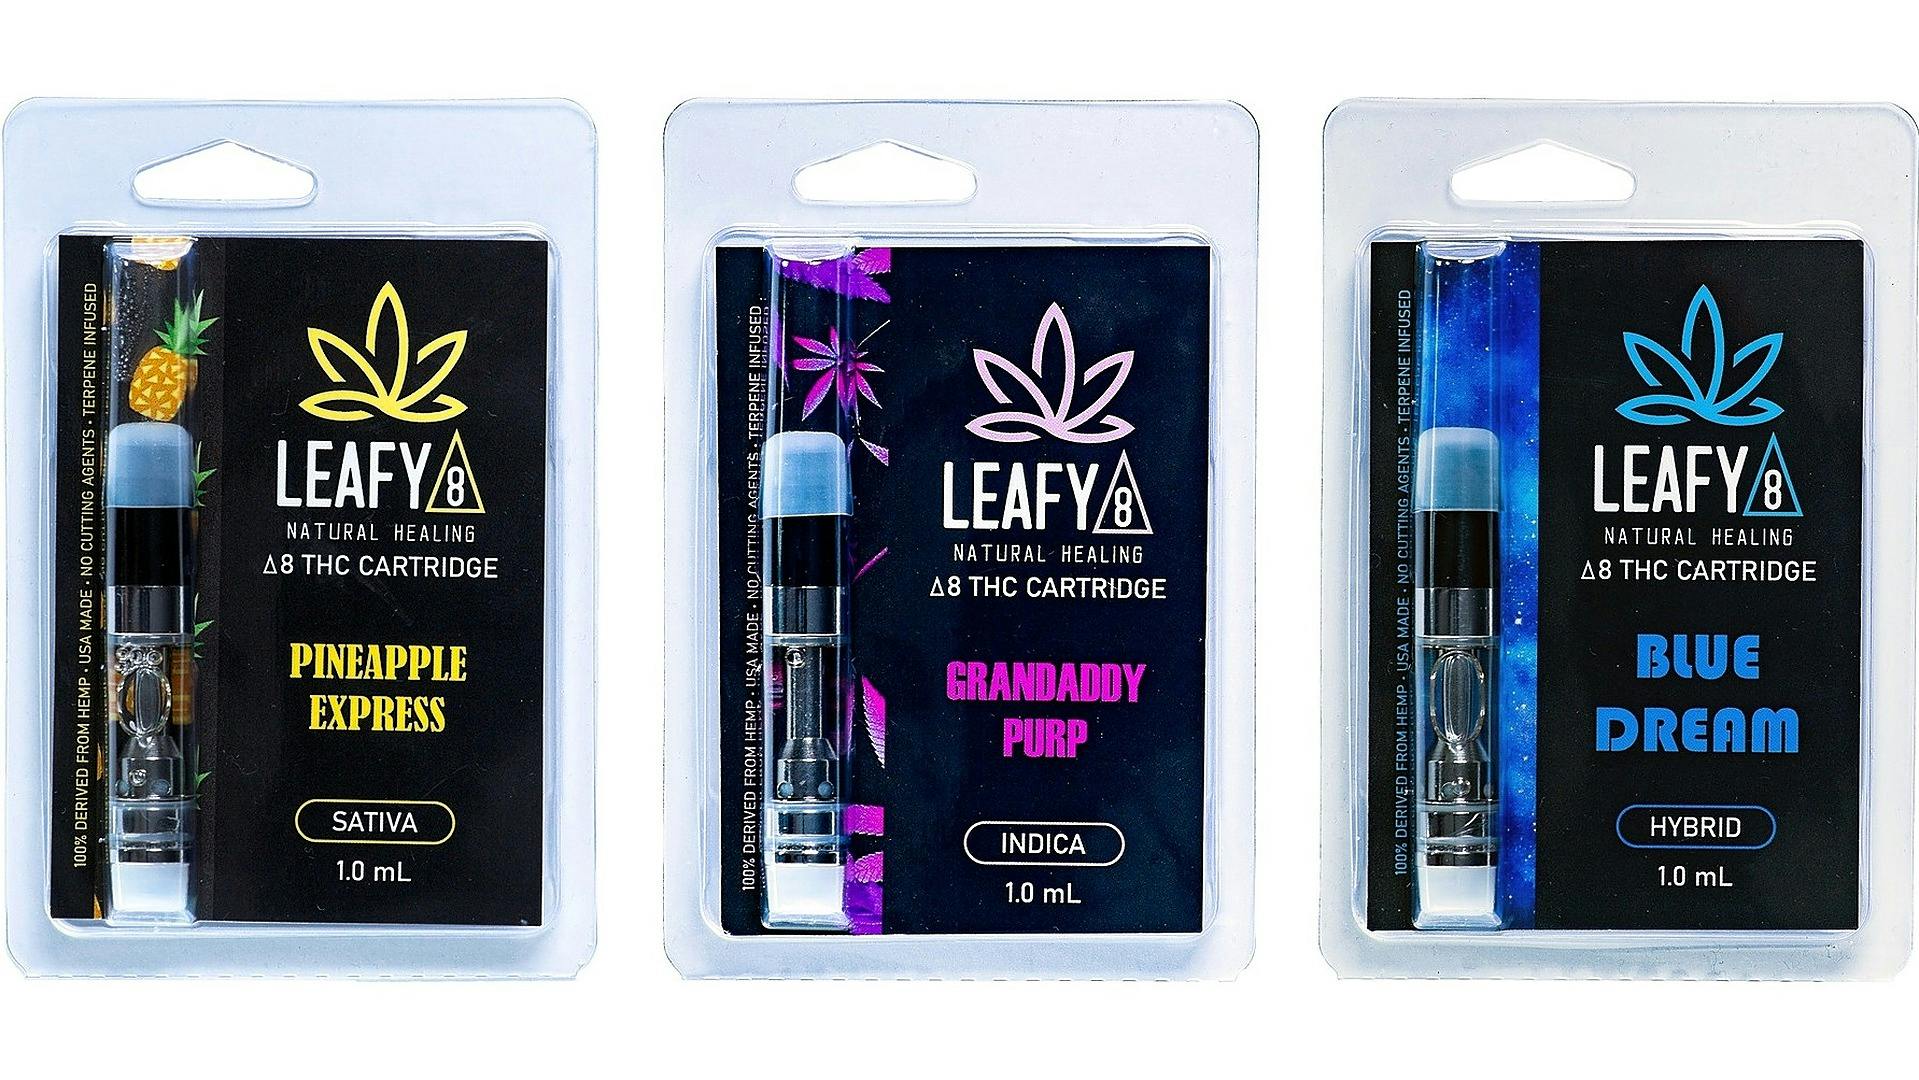 Leafy8 Brand Delta-8 THC \u0026 HHC Products: Elevate Yourself with Leafy8 ...